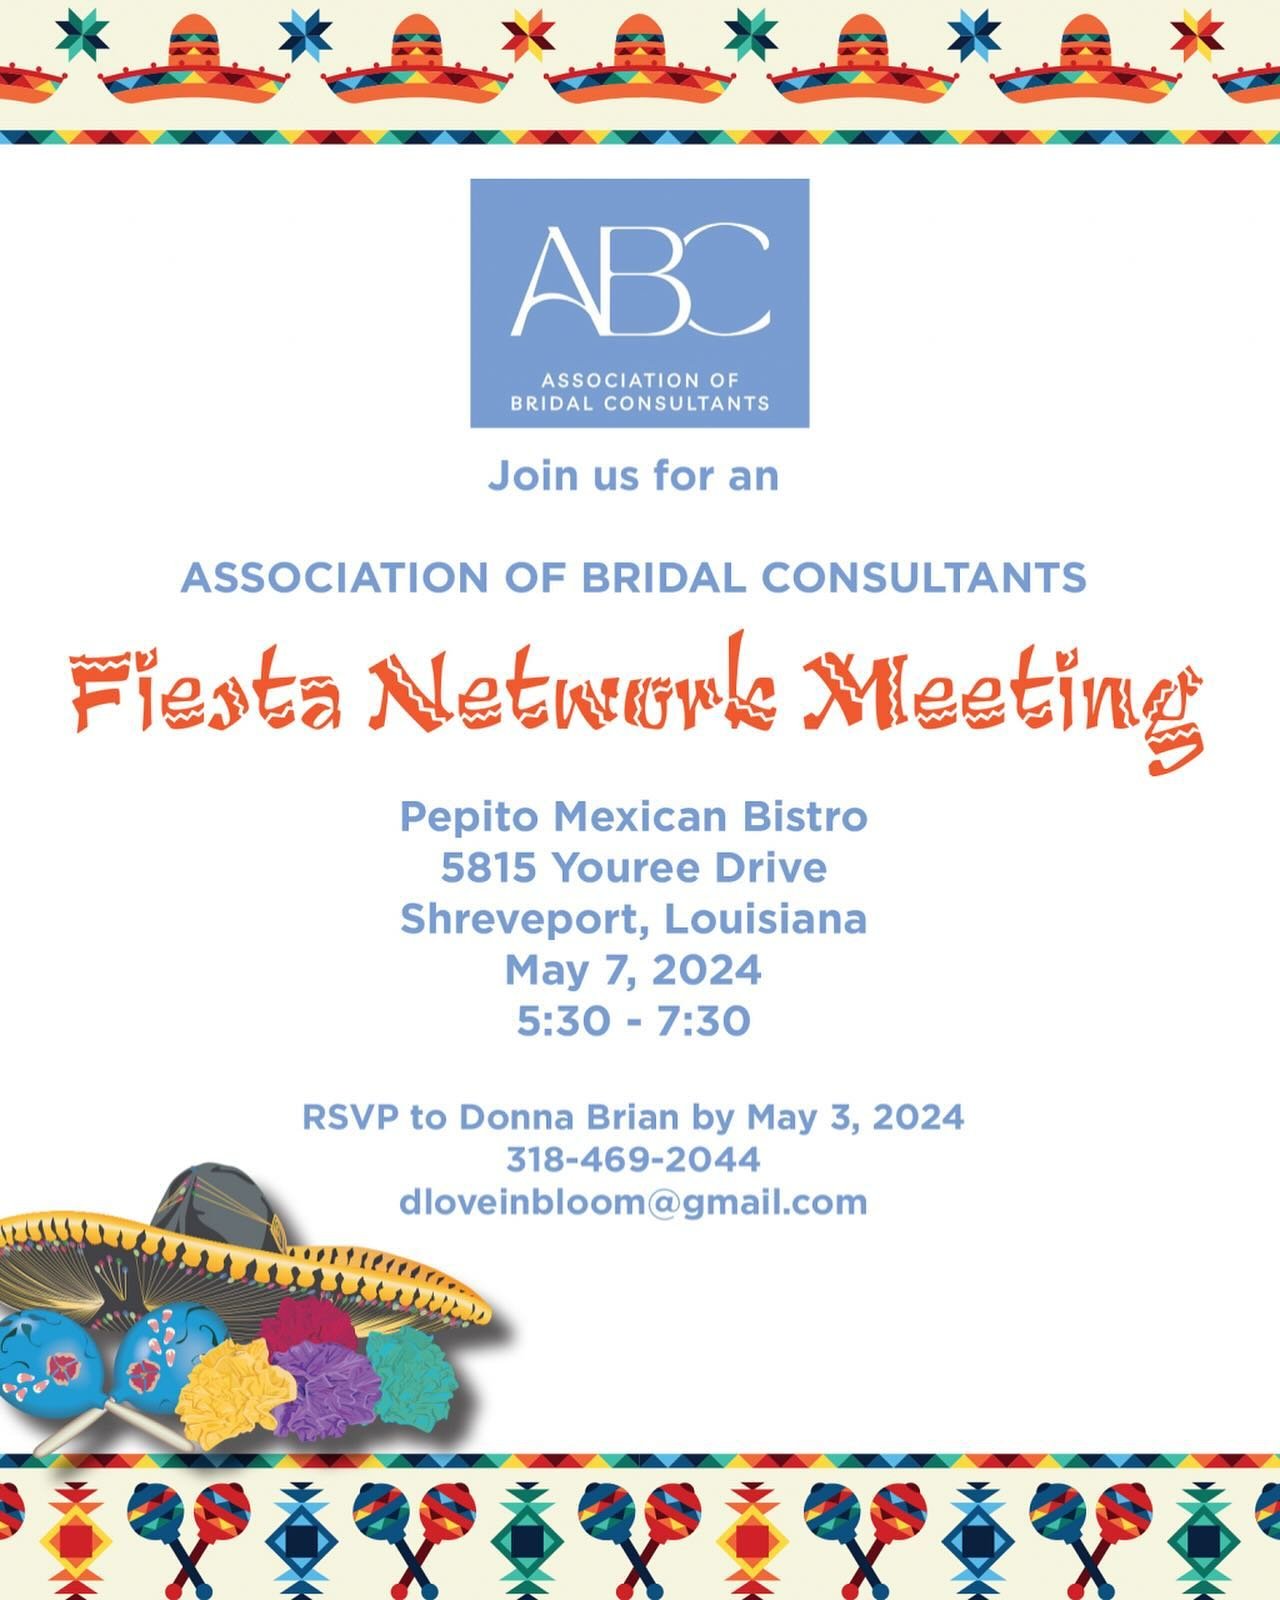 ABC Louisiana Members! This one is for you!

ABC Louisiana Fiesta Network Meeting
- We will discuss future scheduled meetings, annual conference, market and state member expansion.
- How to register at the Dallas Market Center as a buyer. 
- How to g